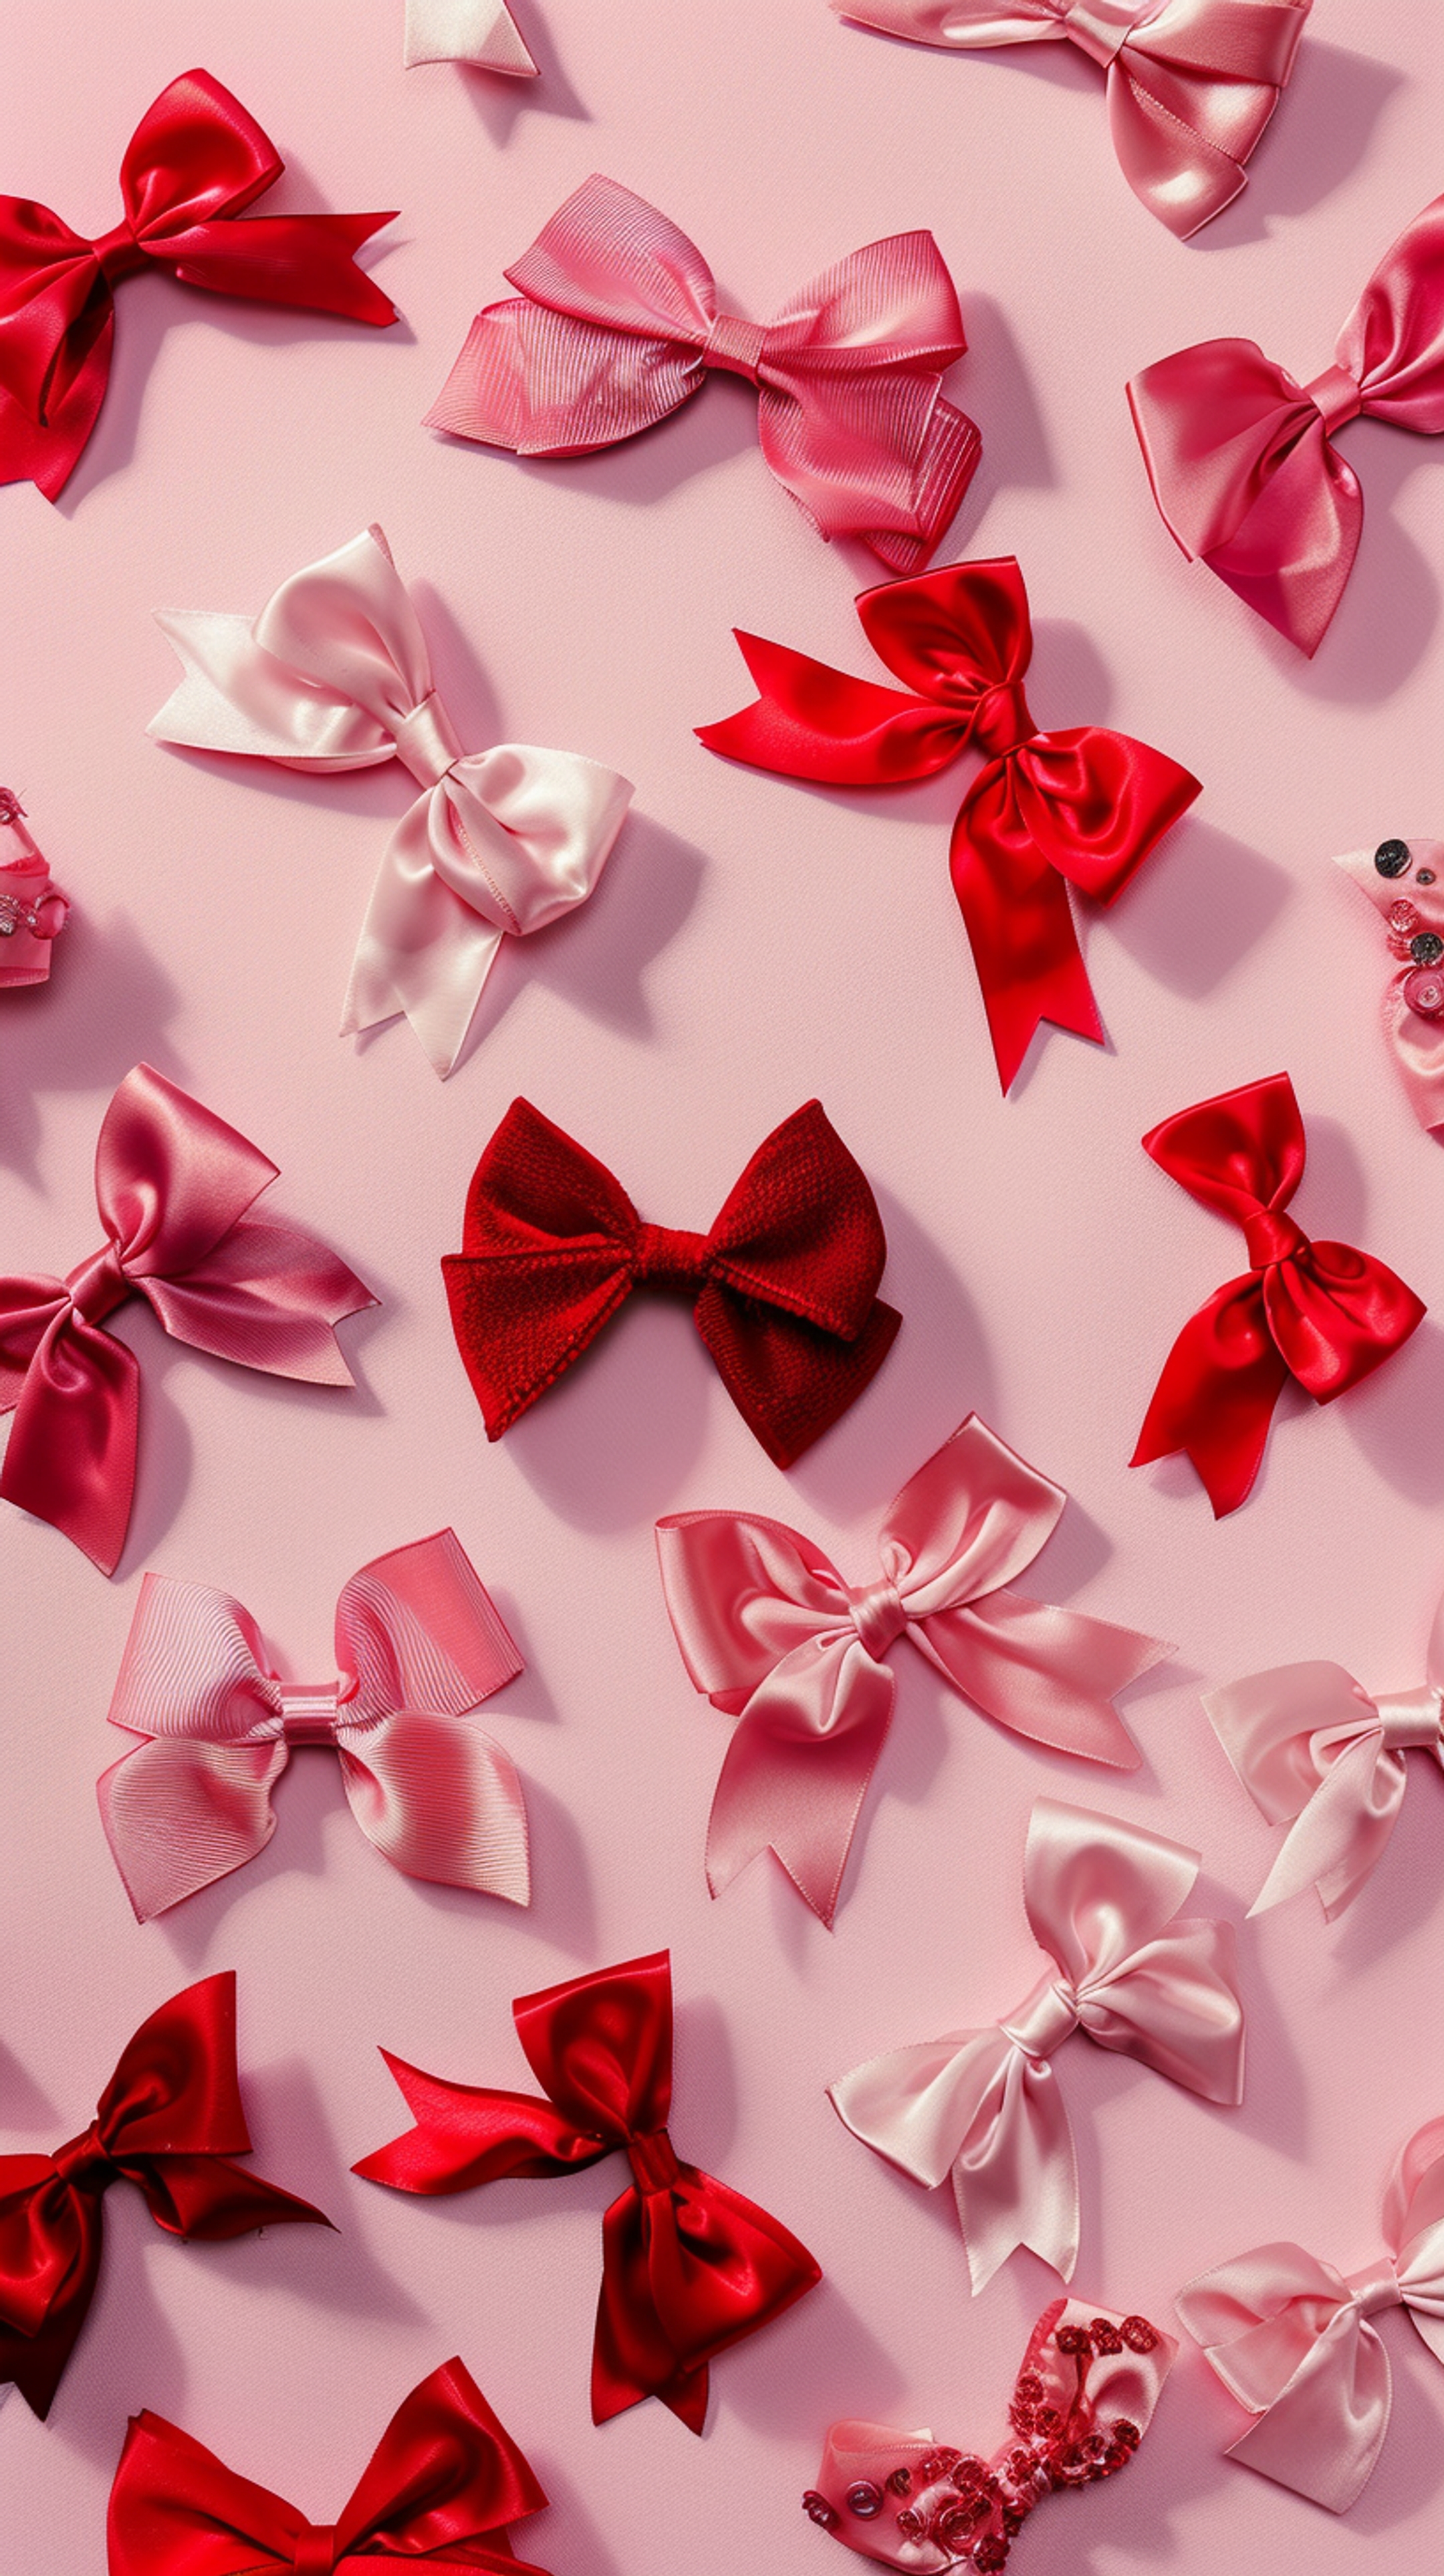 Pretty Pink Bows for Your Screen Tapetai[b7a269512d7d4883b181]